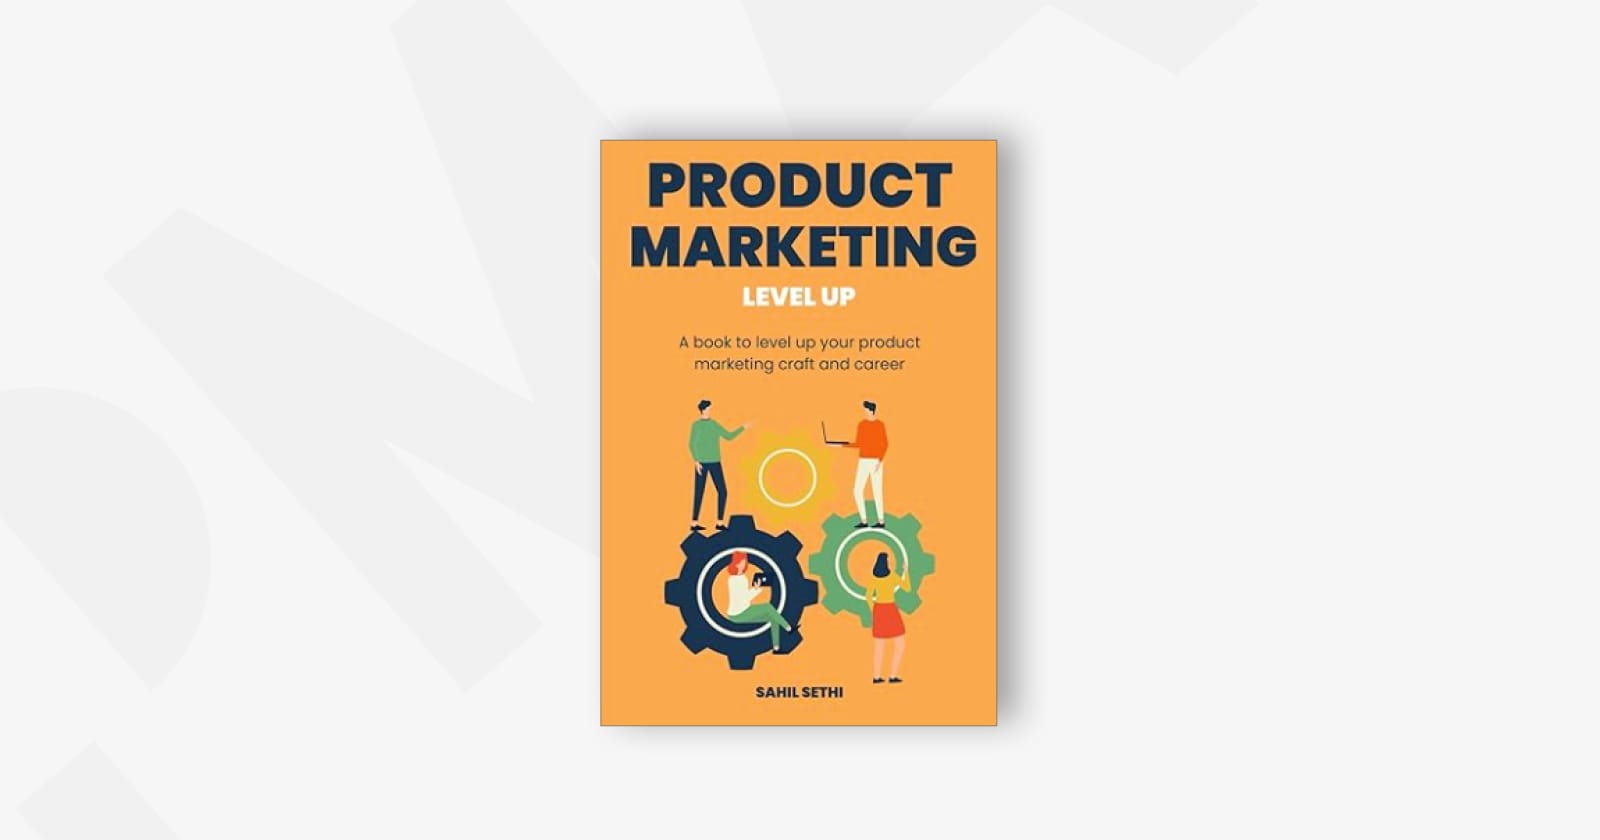 Product Marketing Level Up: A book to level up your product marketing craft and career by Sahil Sethi 